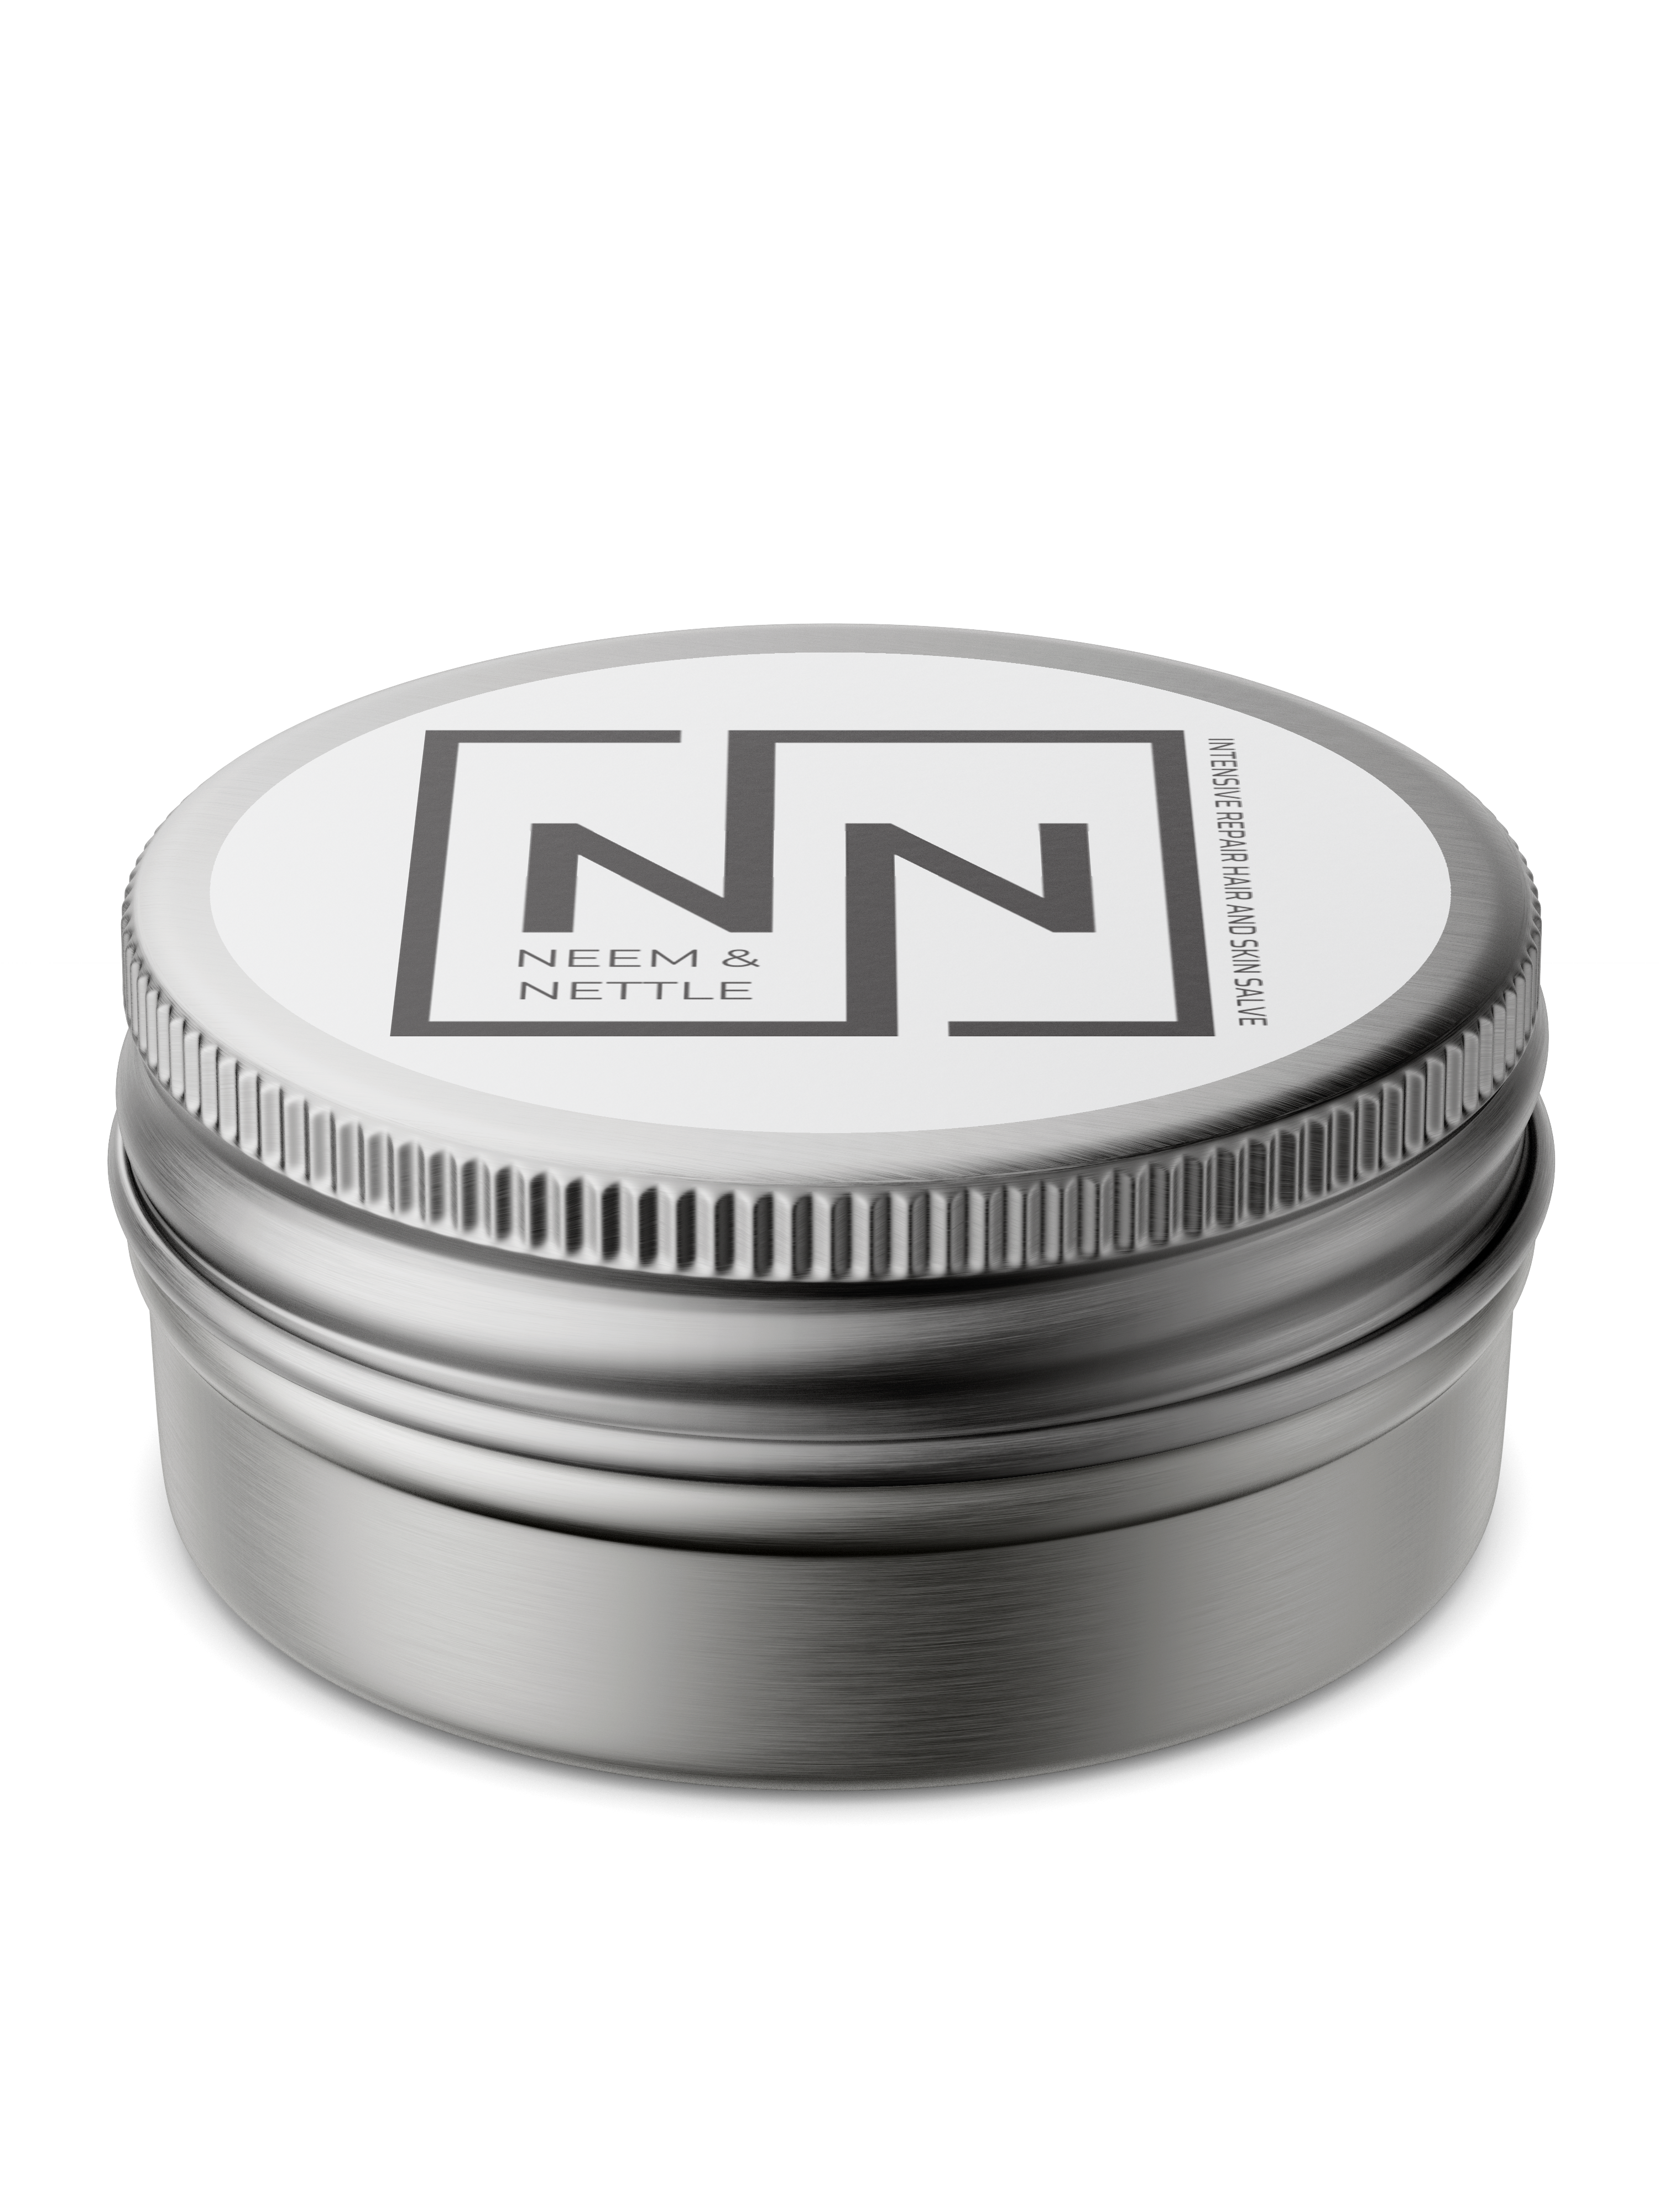 Neem &amp; Nettle Salve tin from Sacred Plant Co, a hair and skin repair salve, highlighting the natural ingredients in a sleek metal container with a modern, minimalist label design.